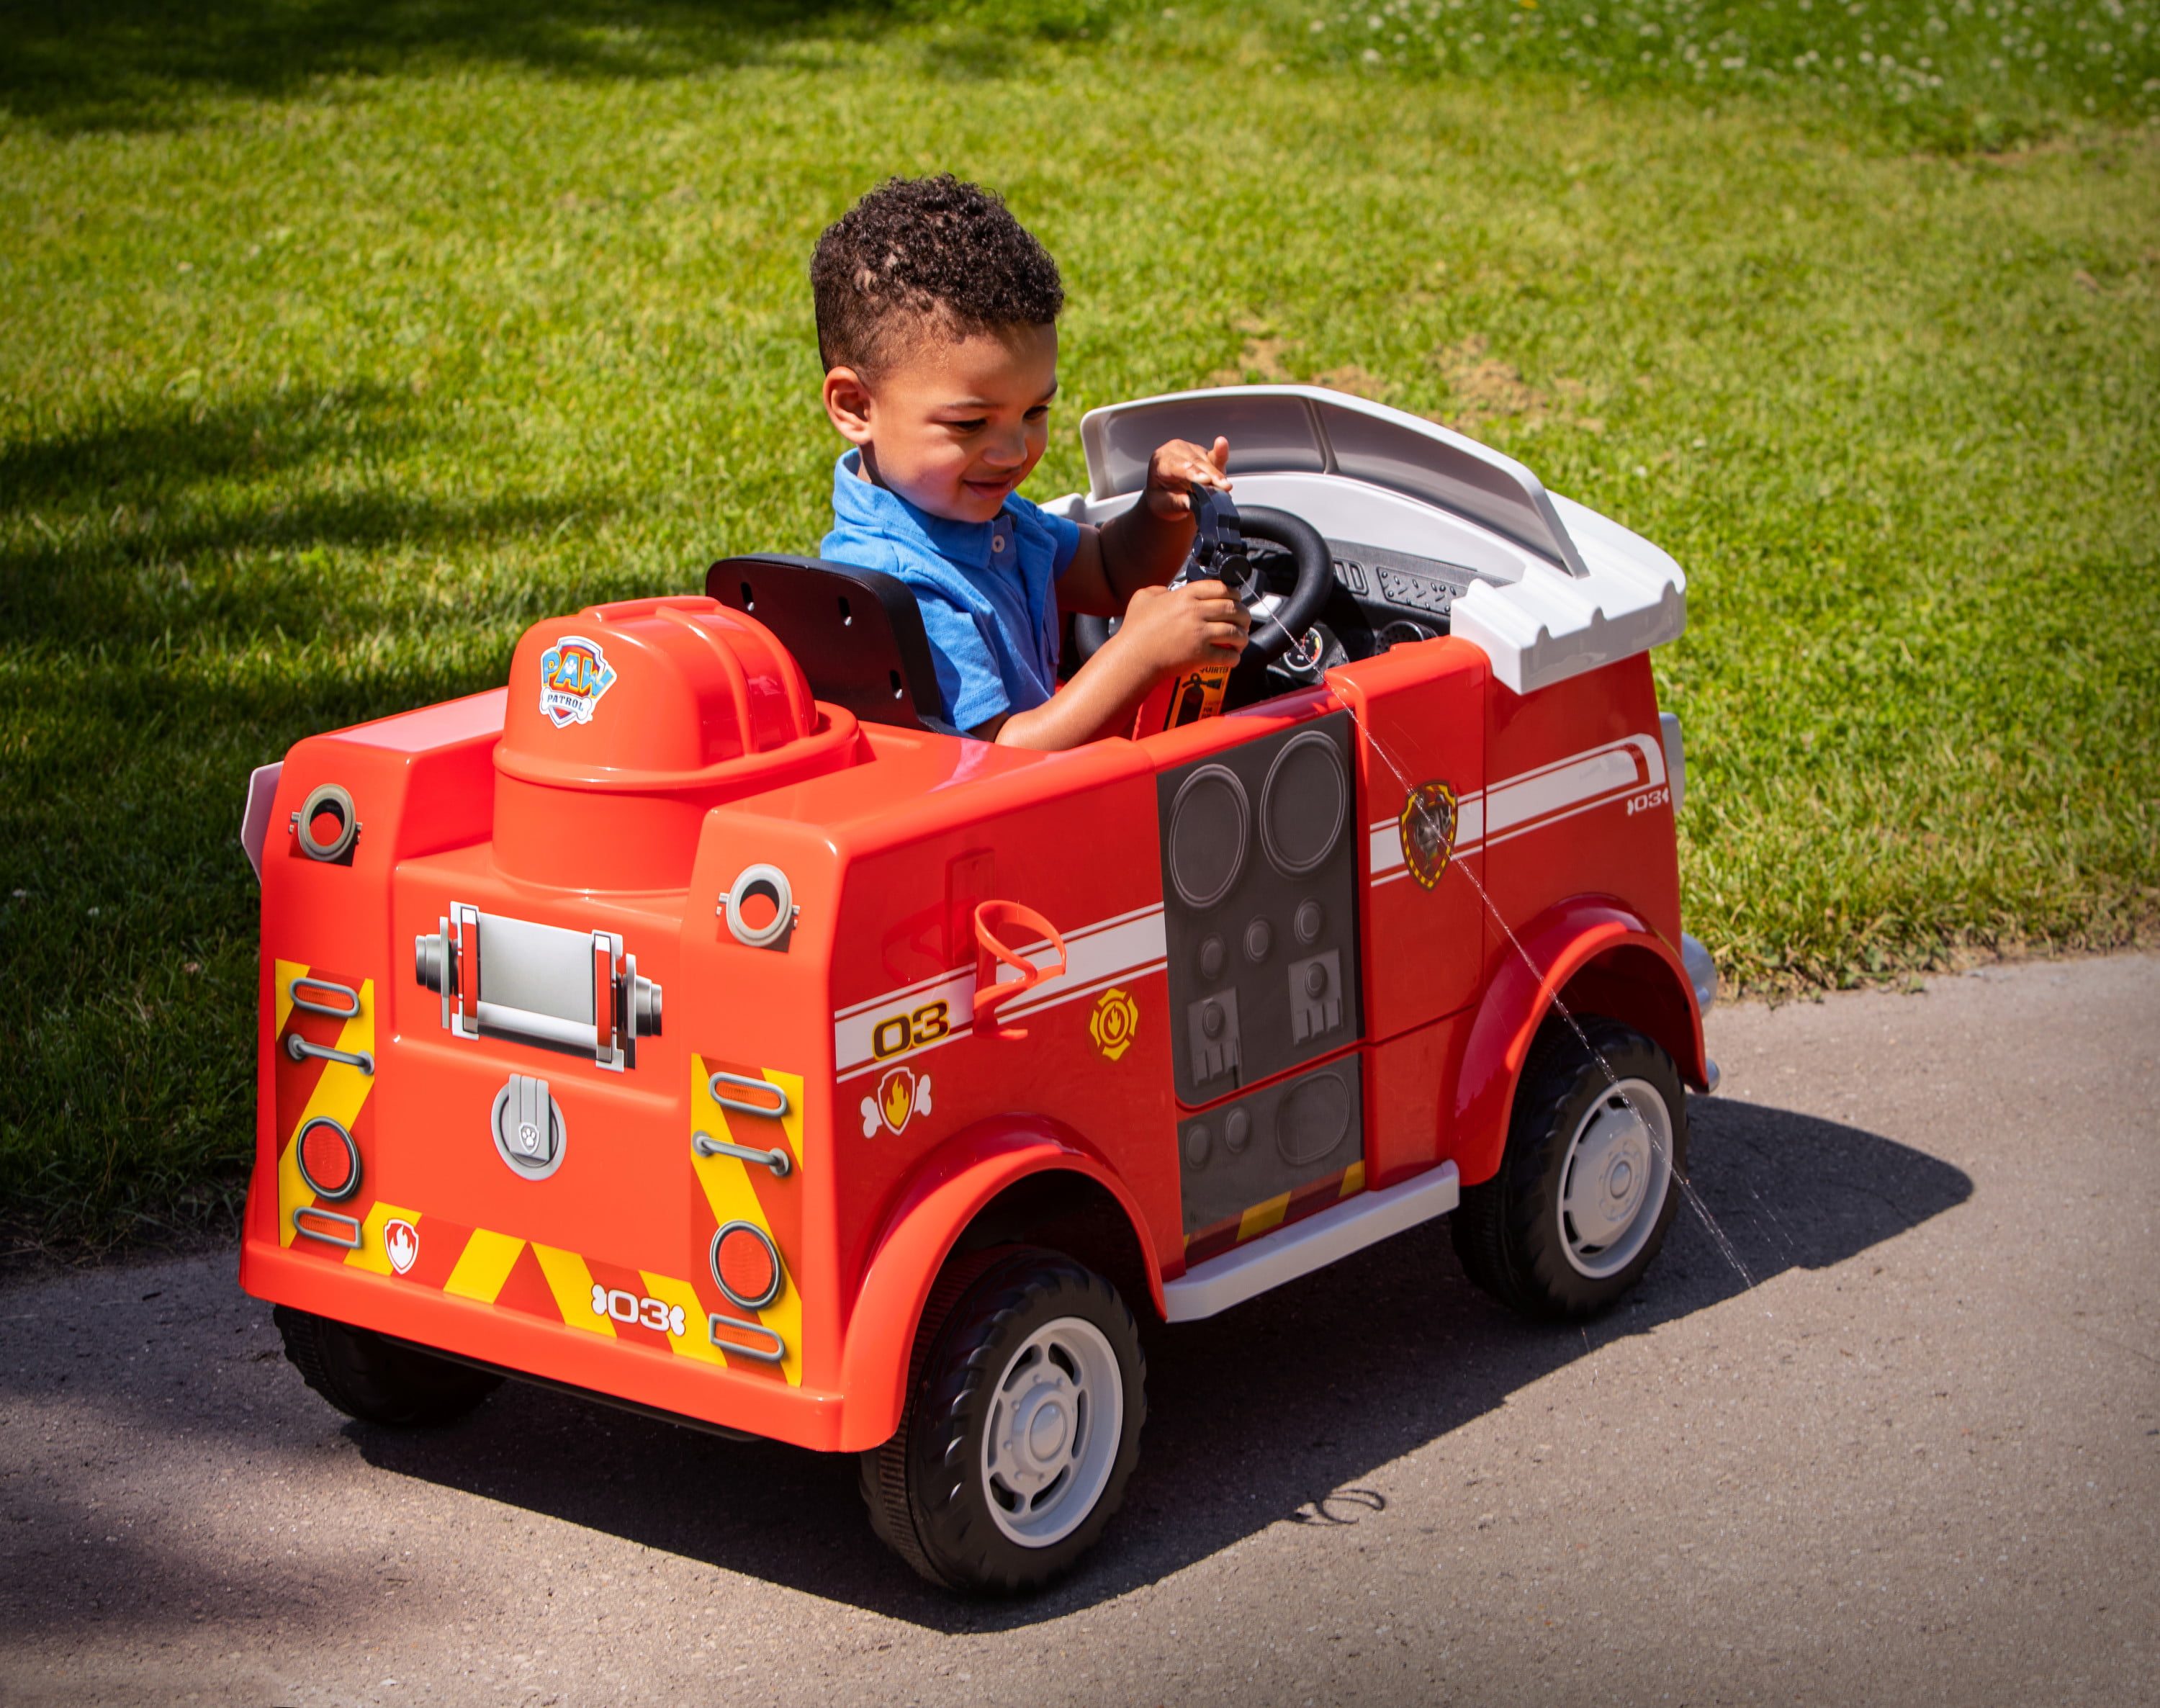 paw patrol fire truck 6 volt powered ride on toy